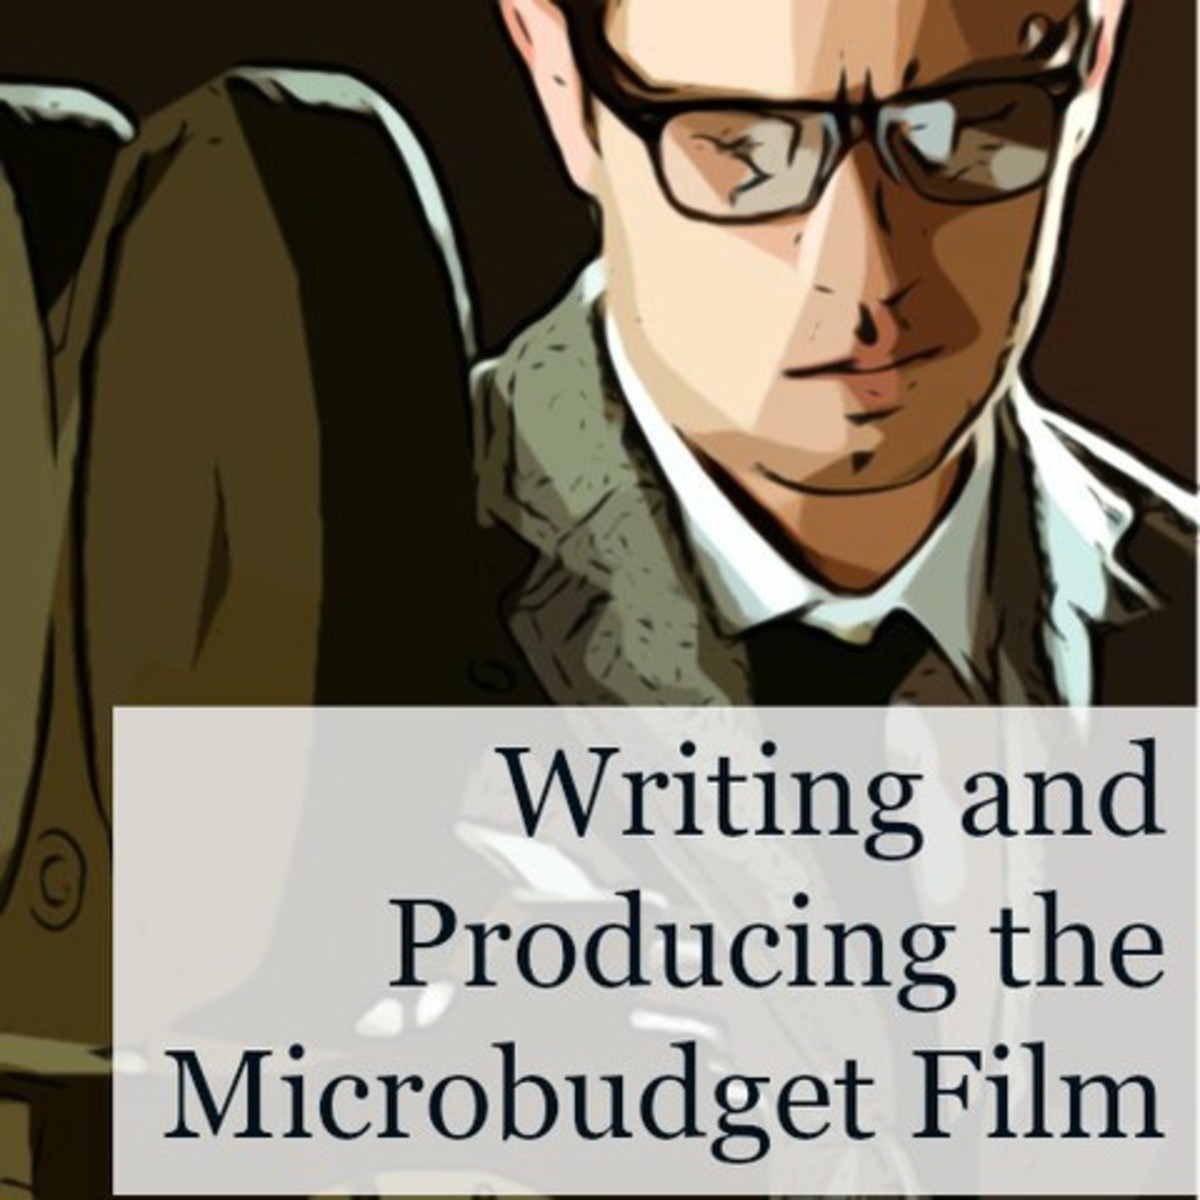 Writing and Producing the Microbudget Film